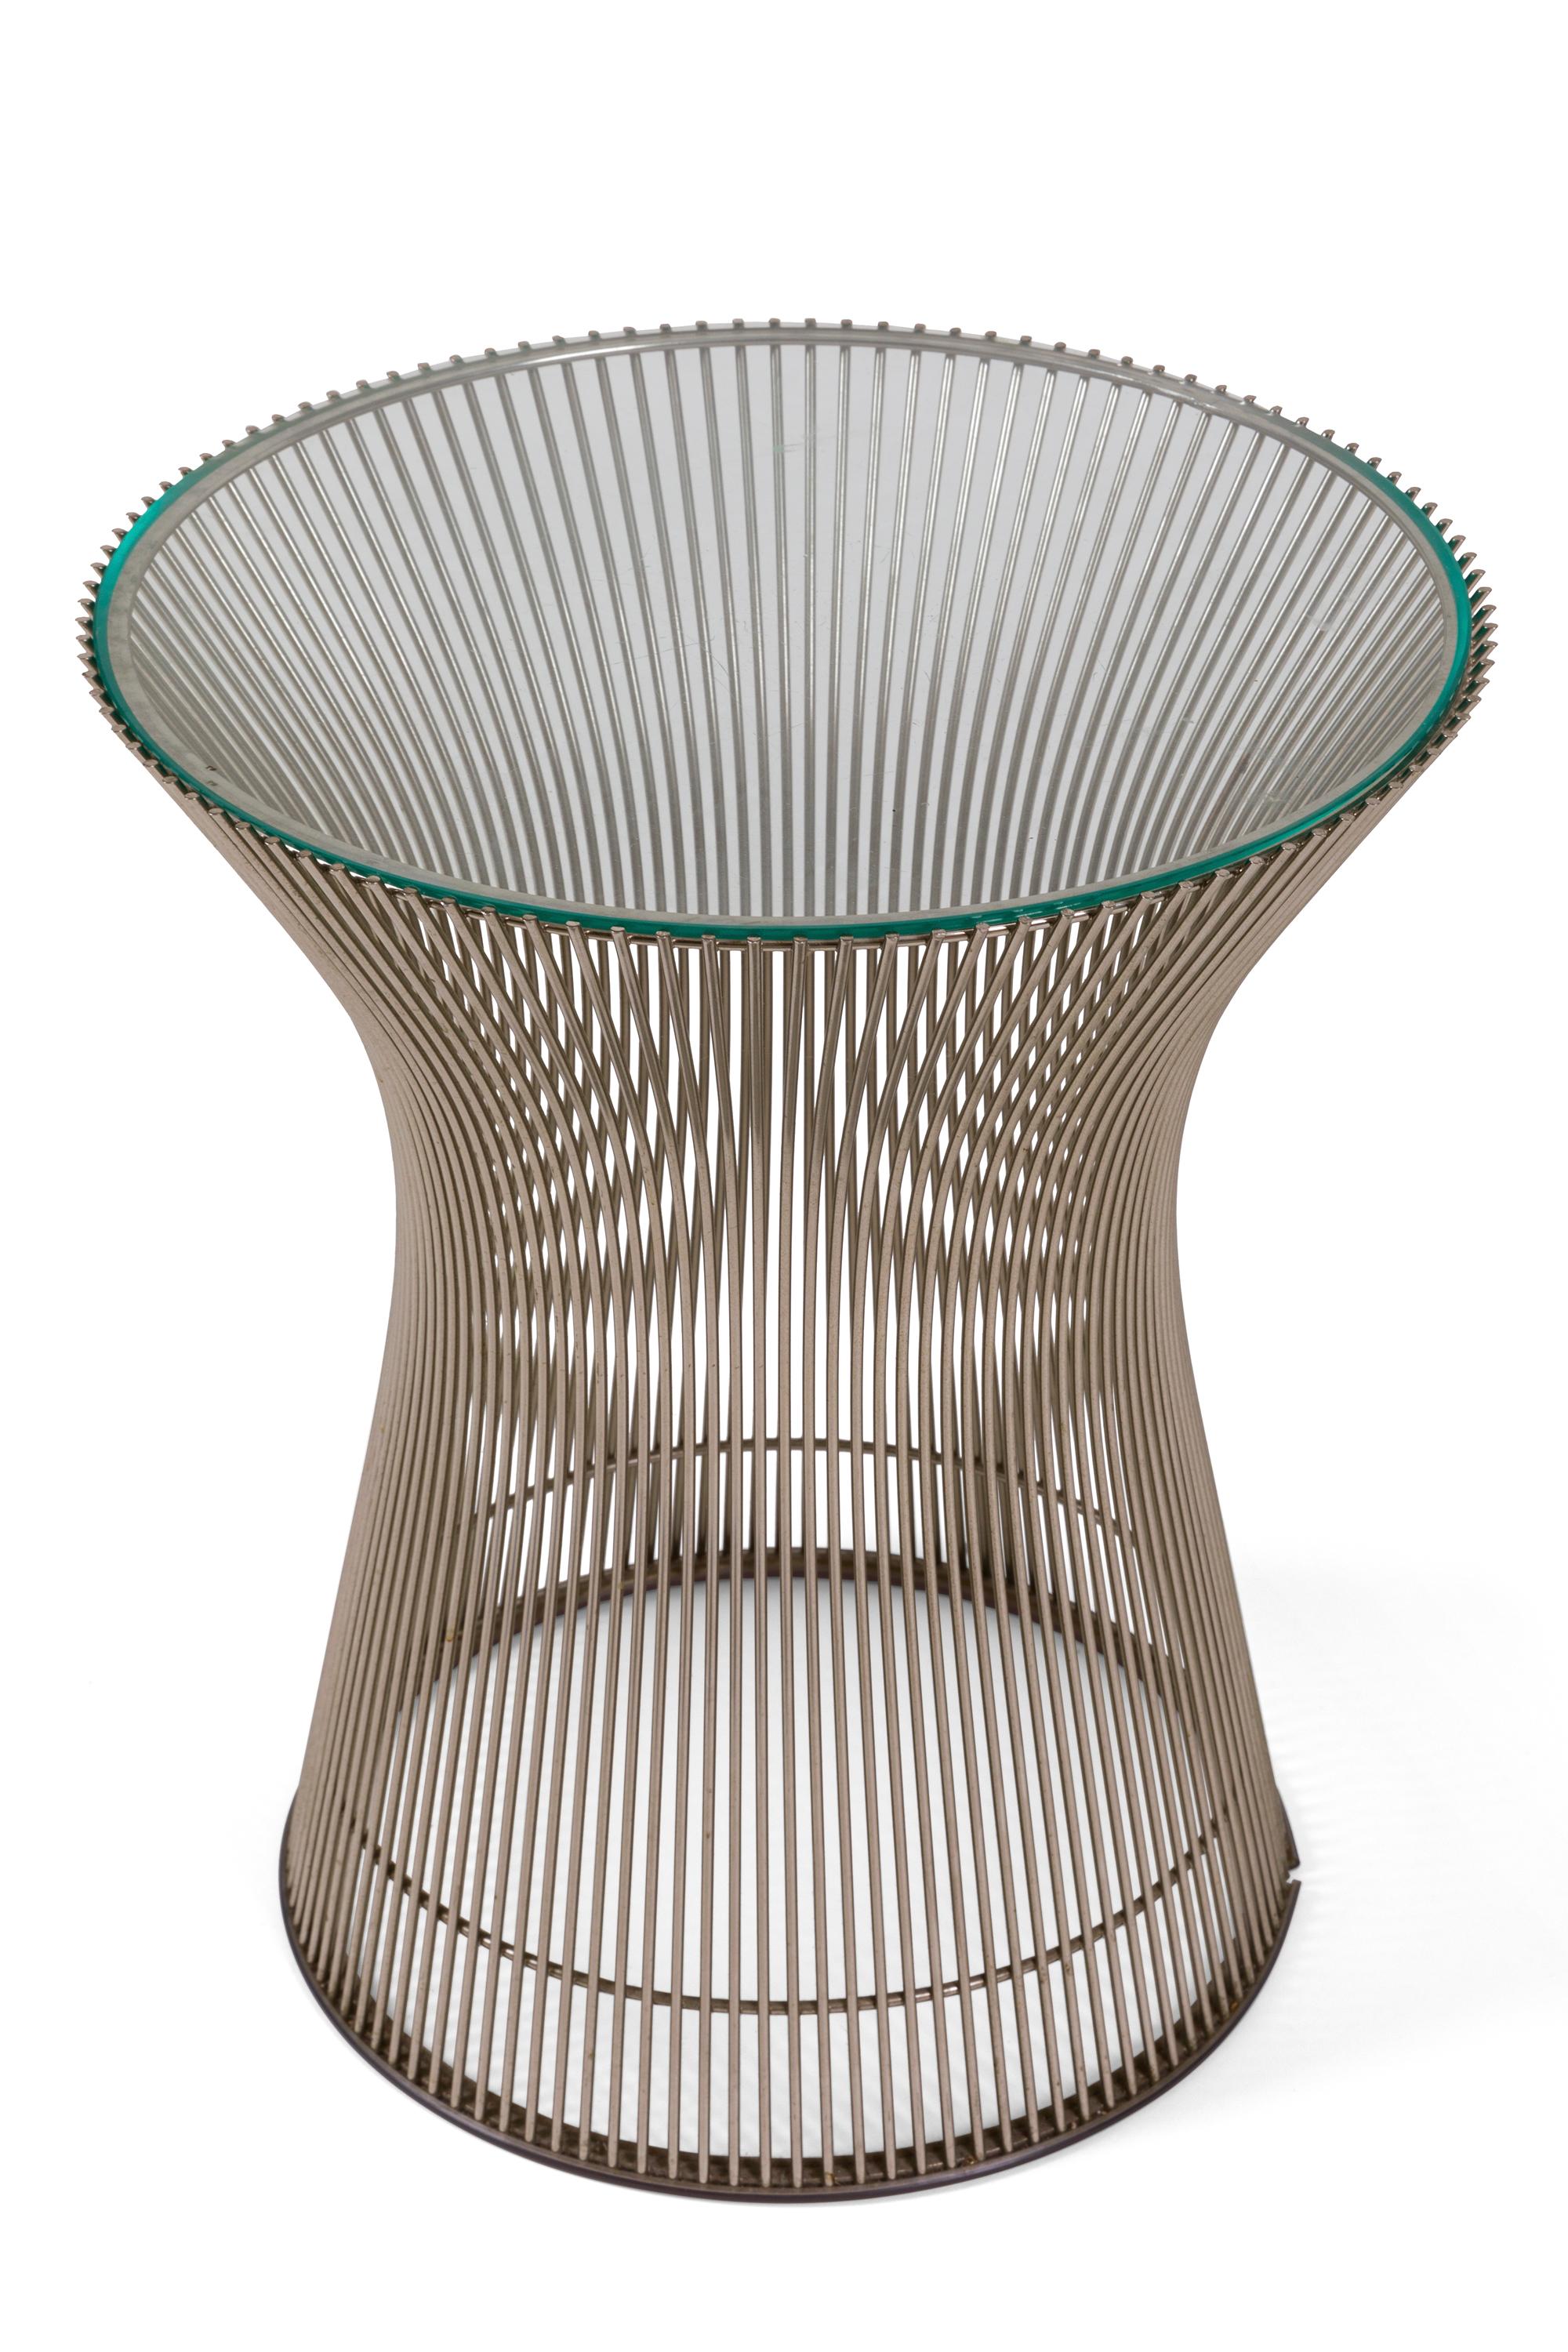 Part of the Platner collection by Knoll in 1962. The side table well demonstrates Platner's industrial materials married with the graceful organic design.